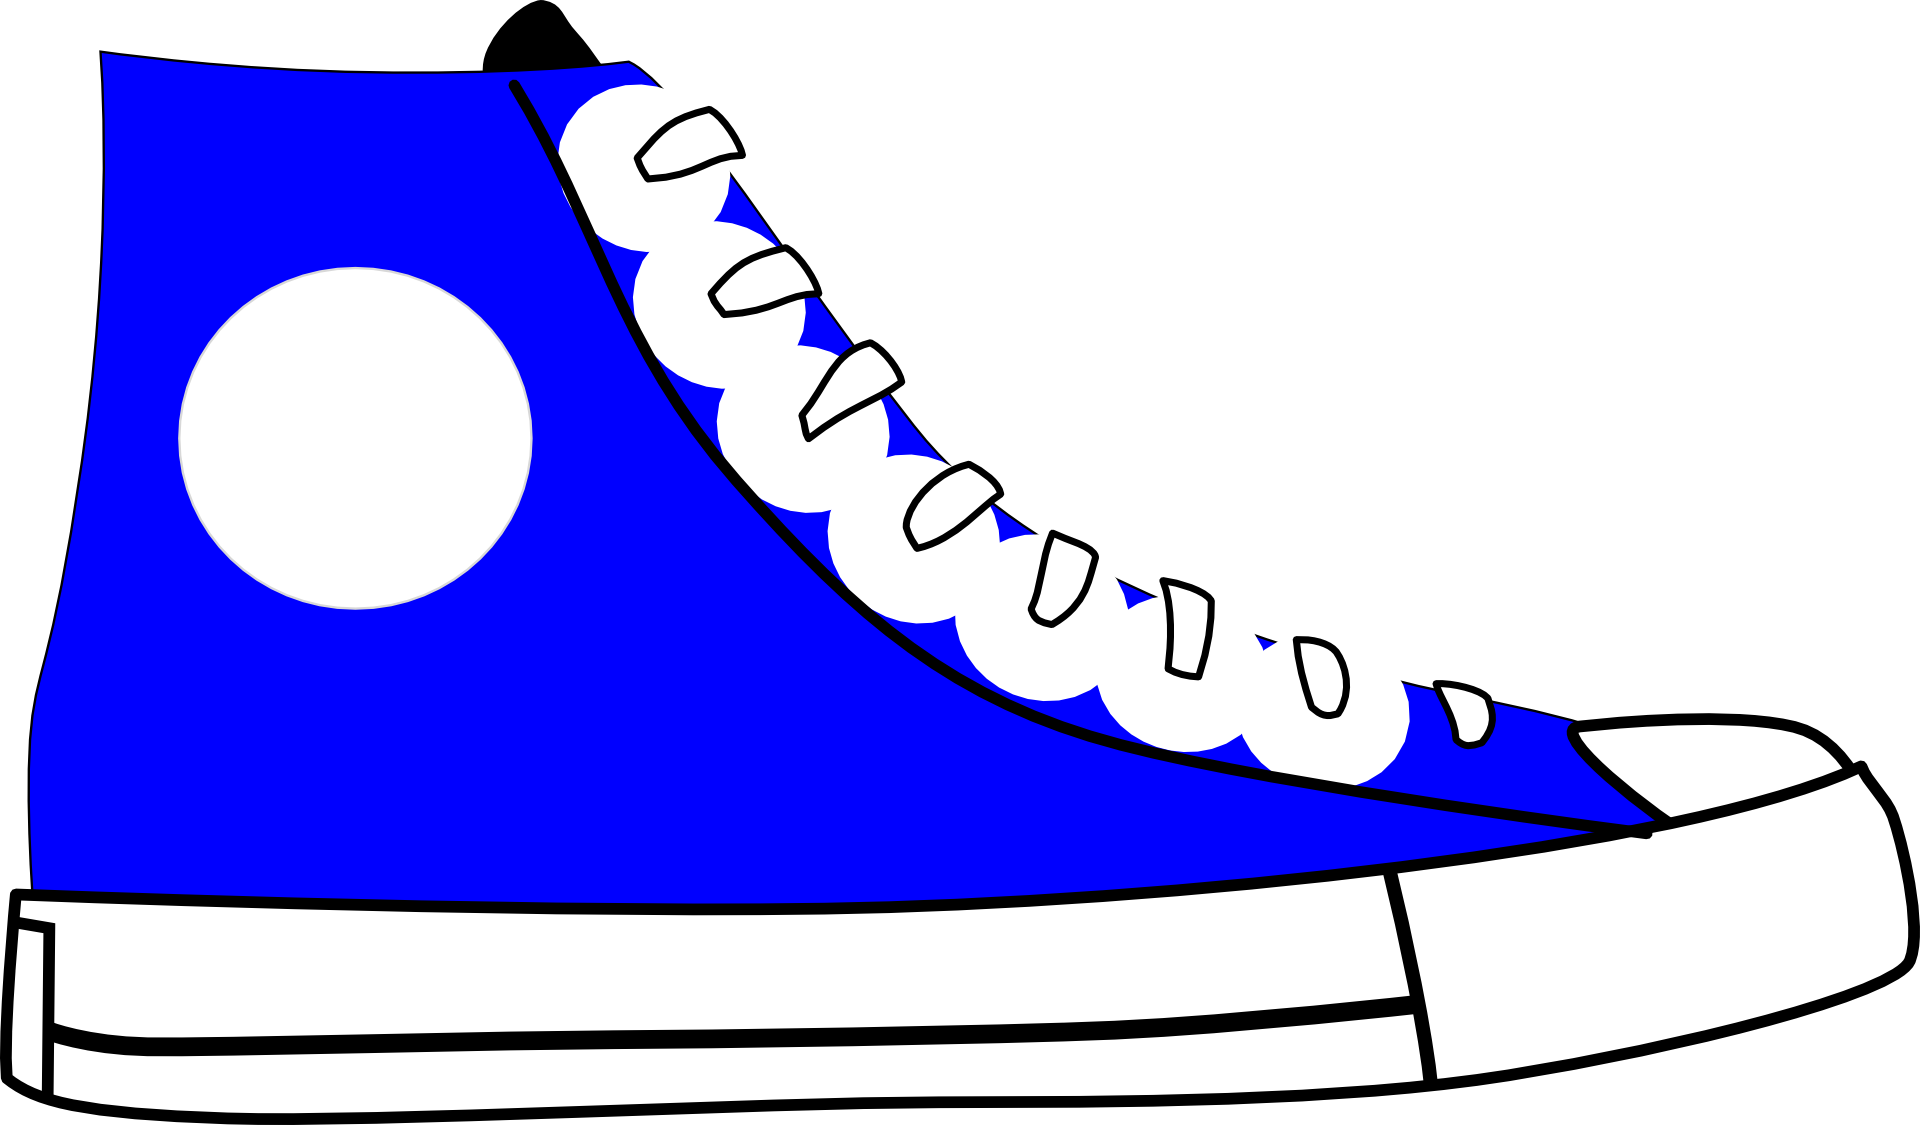 All Star Converse clipart free image download